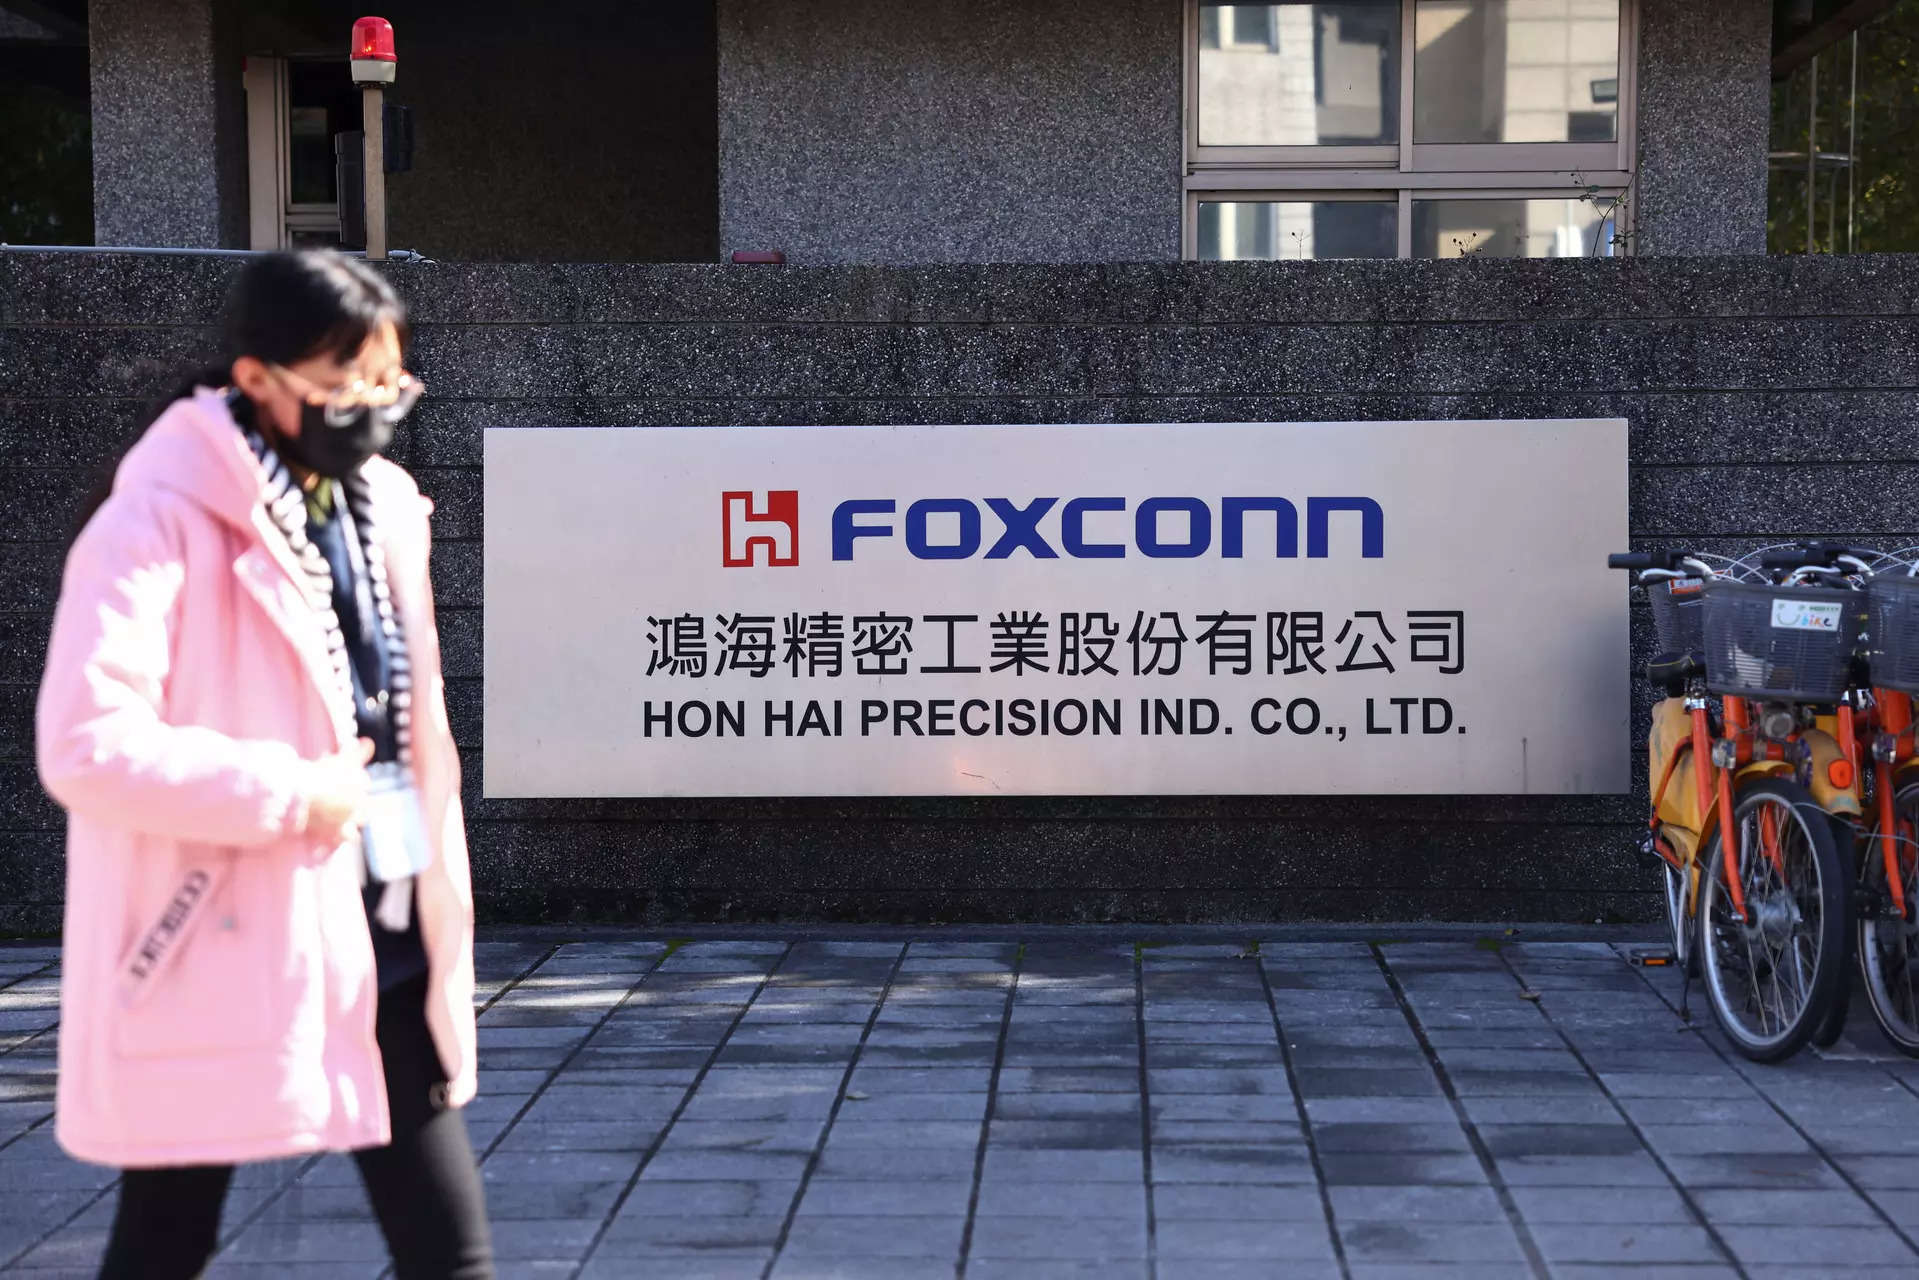 All foreign, Taiwanese firms need to adapt to India's biz envt: TAITRA on Foxconn hiring row 